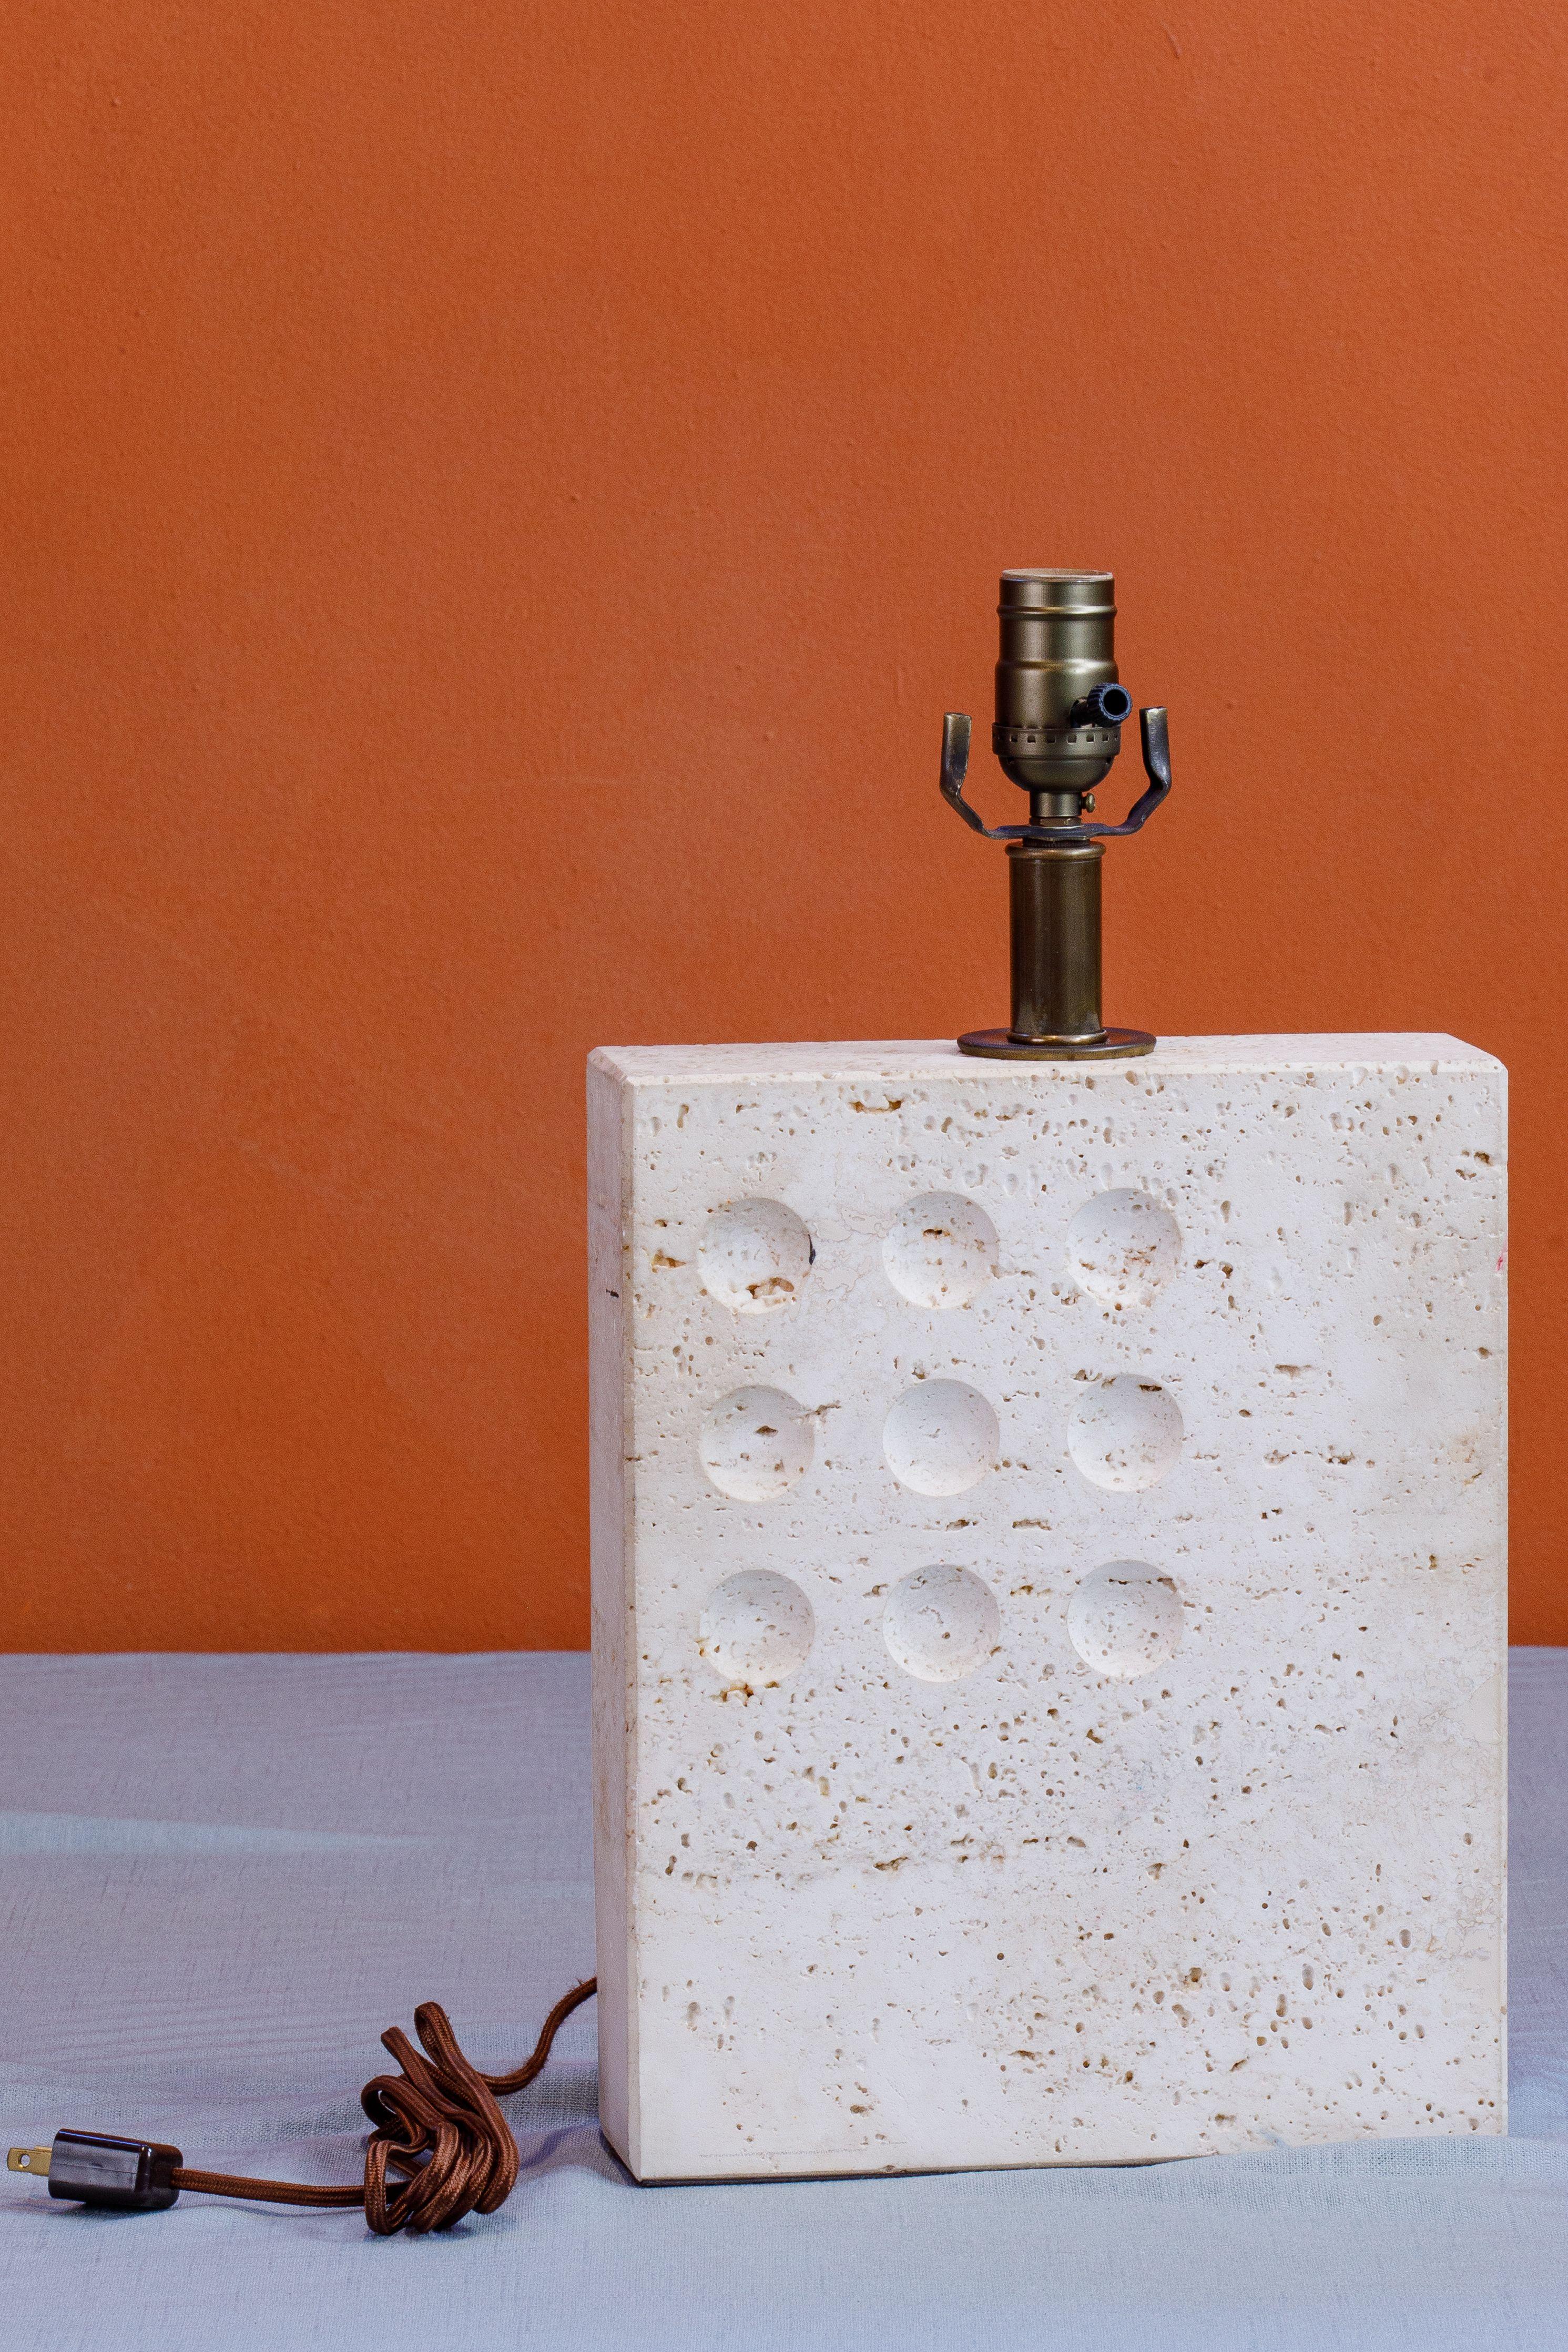 Stunning Italian travertine table lamp in the style of Goffredo Reggiani circa 1960s. Solid travertine lamp with a grid of 9 carved / impressed circular designs. Brass stem, harp and finial. Takes one standard base light bulb. The lamp has been